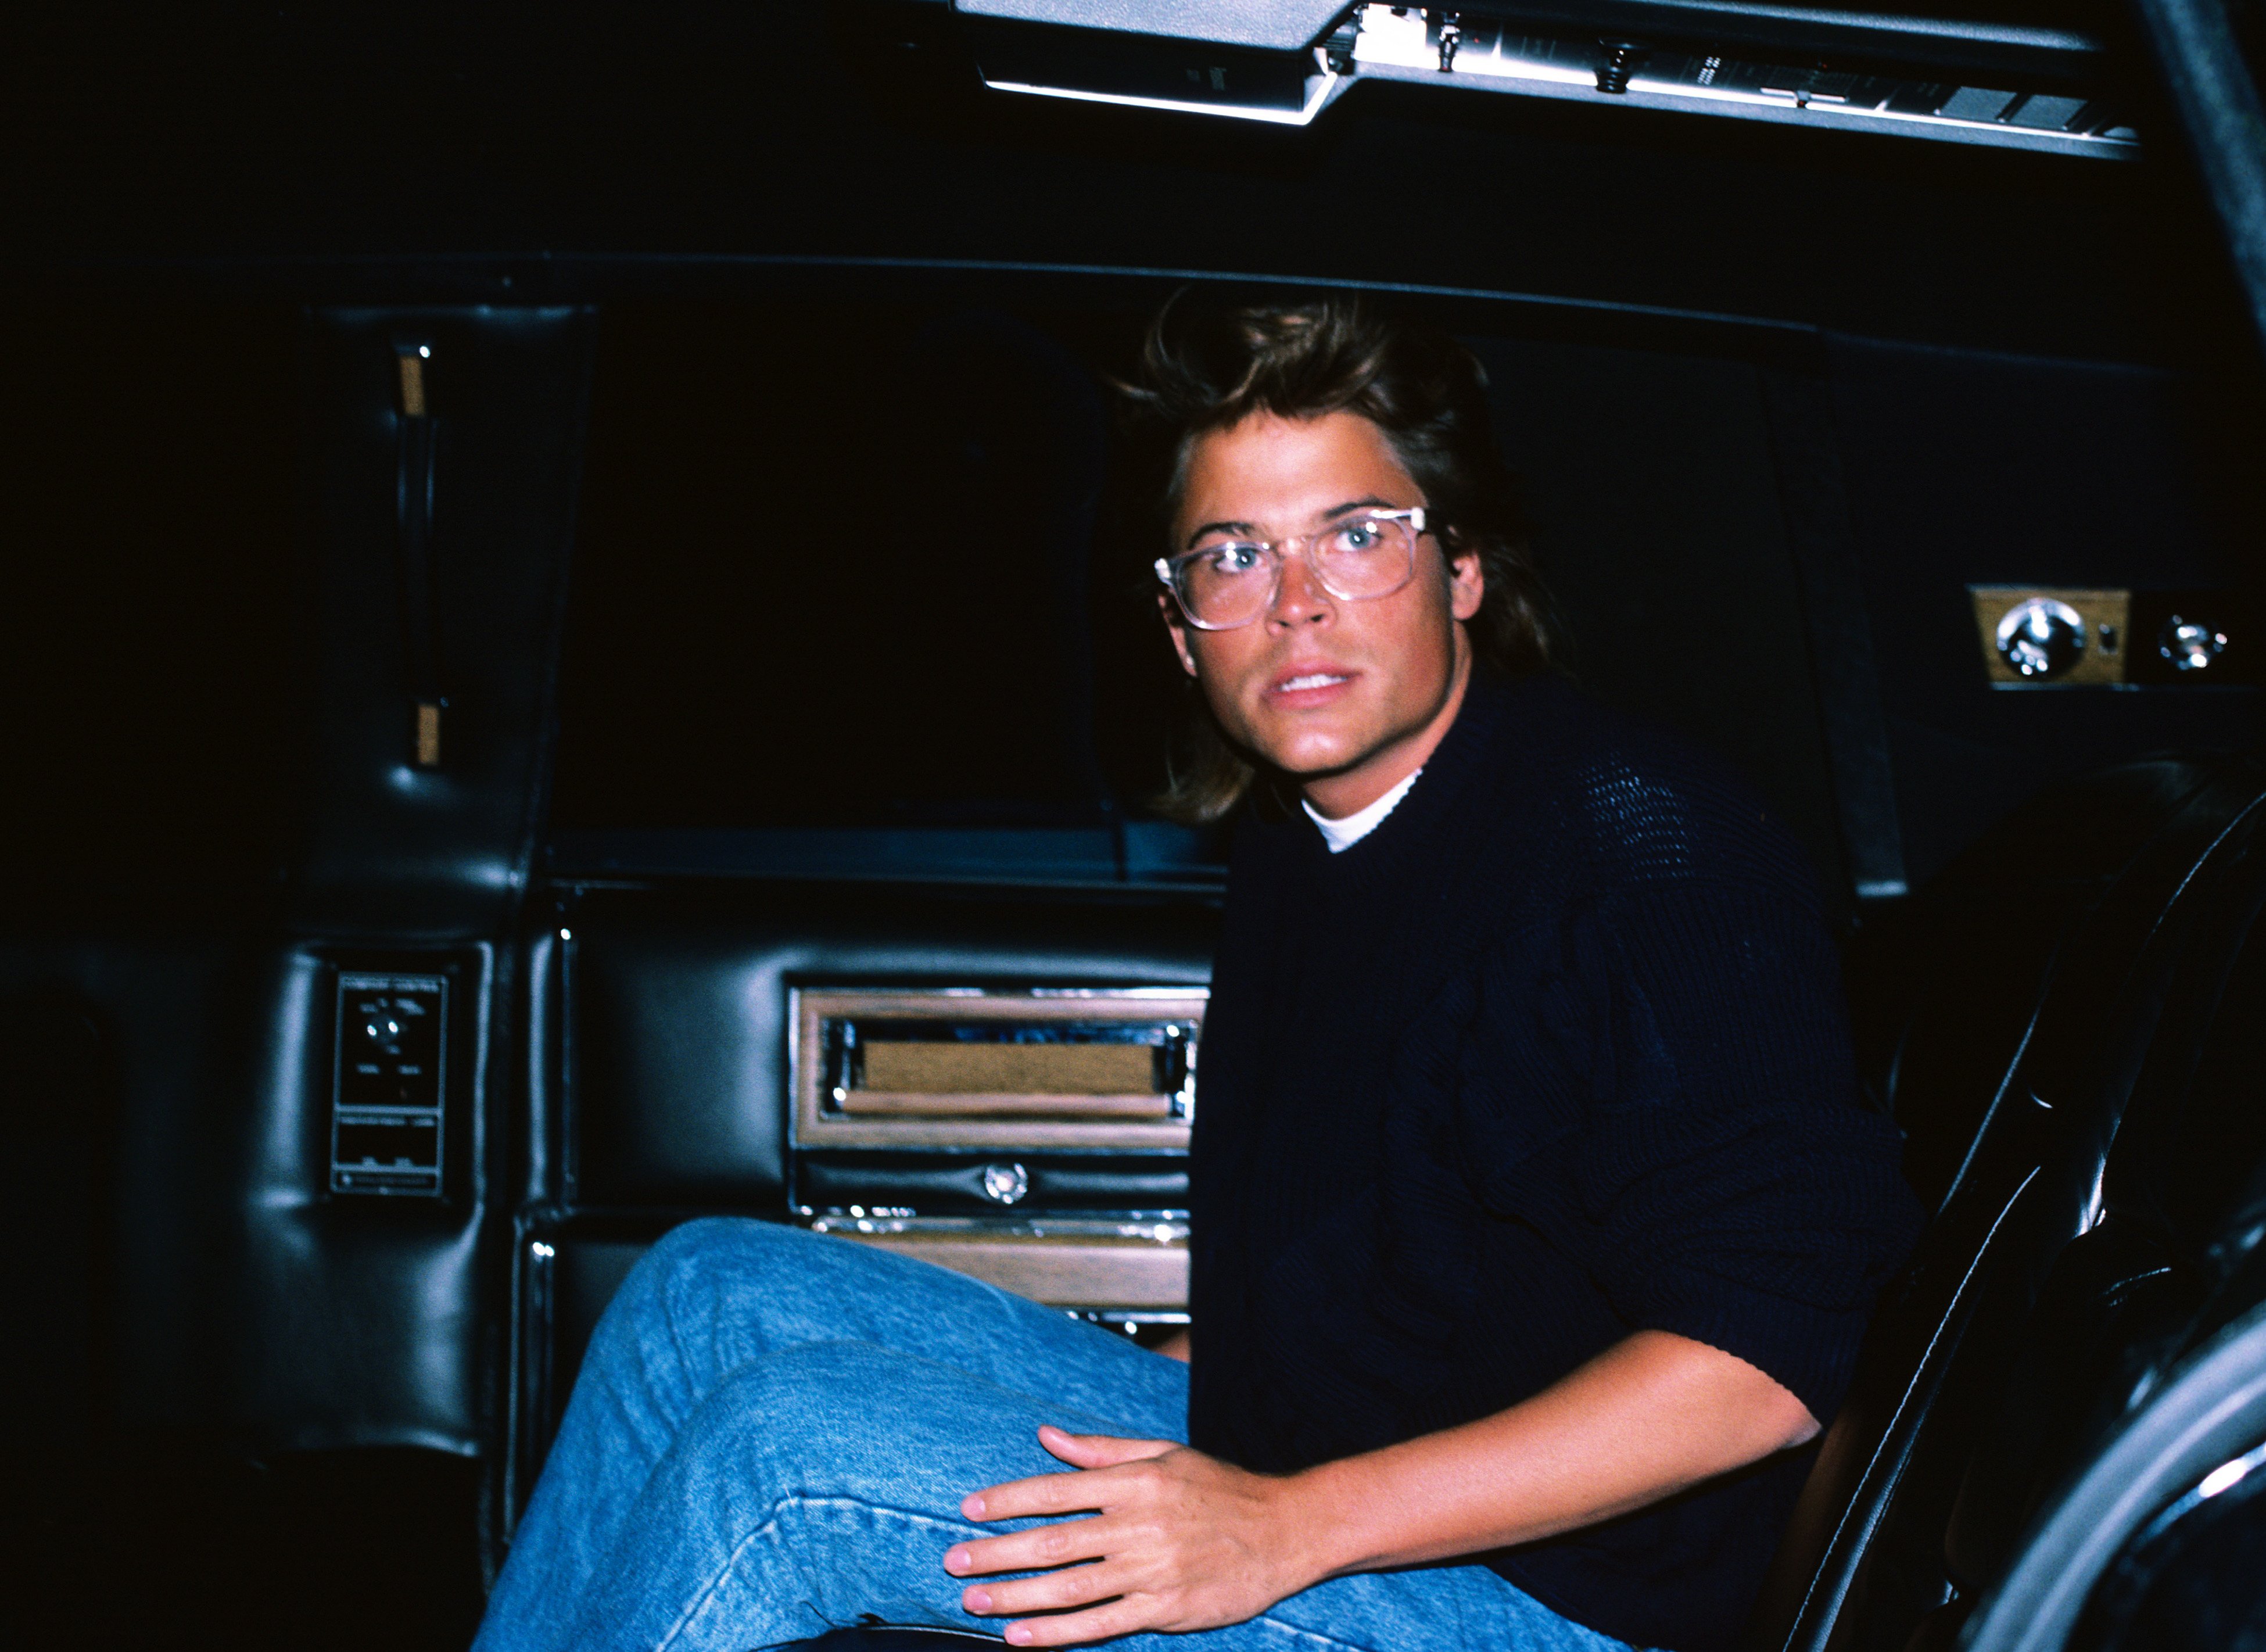 Rob Lowe pictured wearing glasses paired jeans and a blue sweater on June 1, 1985 in New York City. / Source: Getty Images